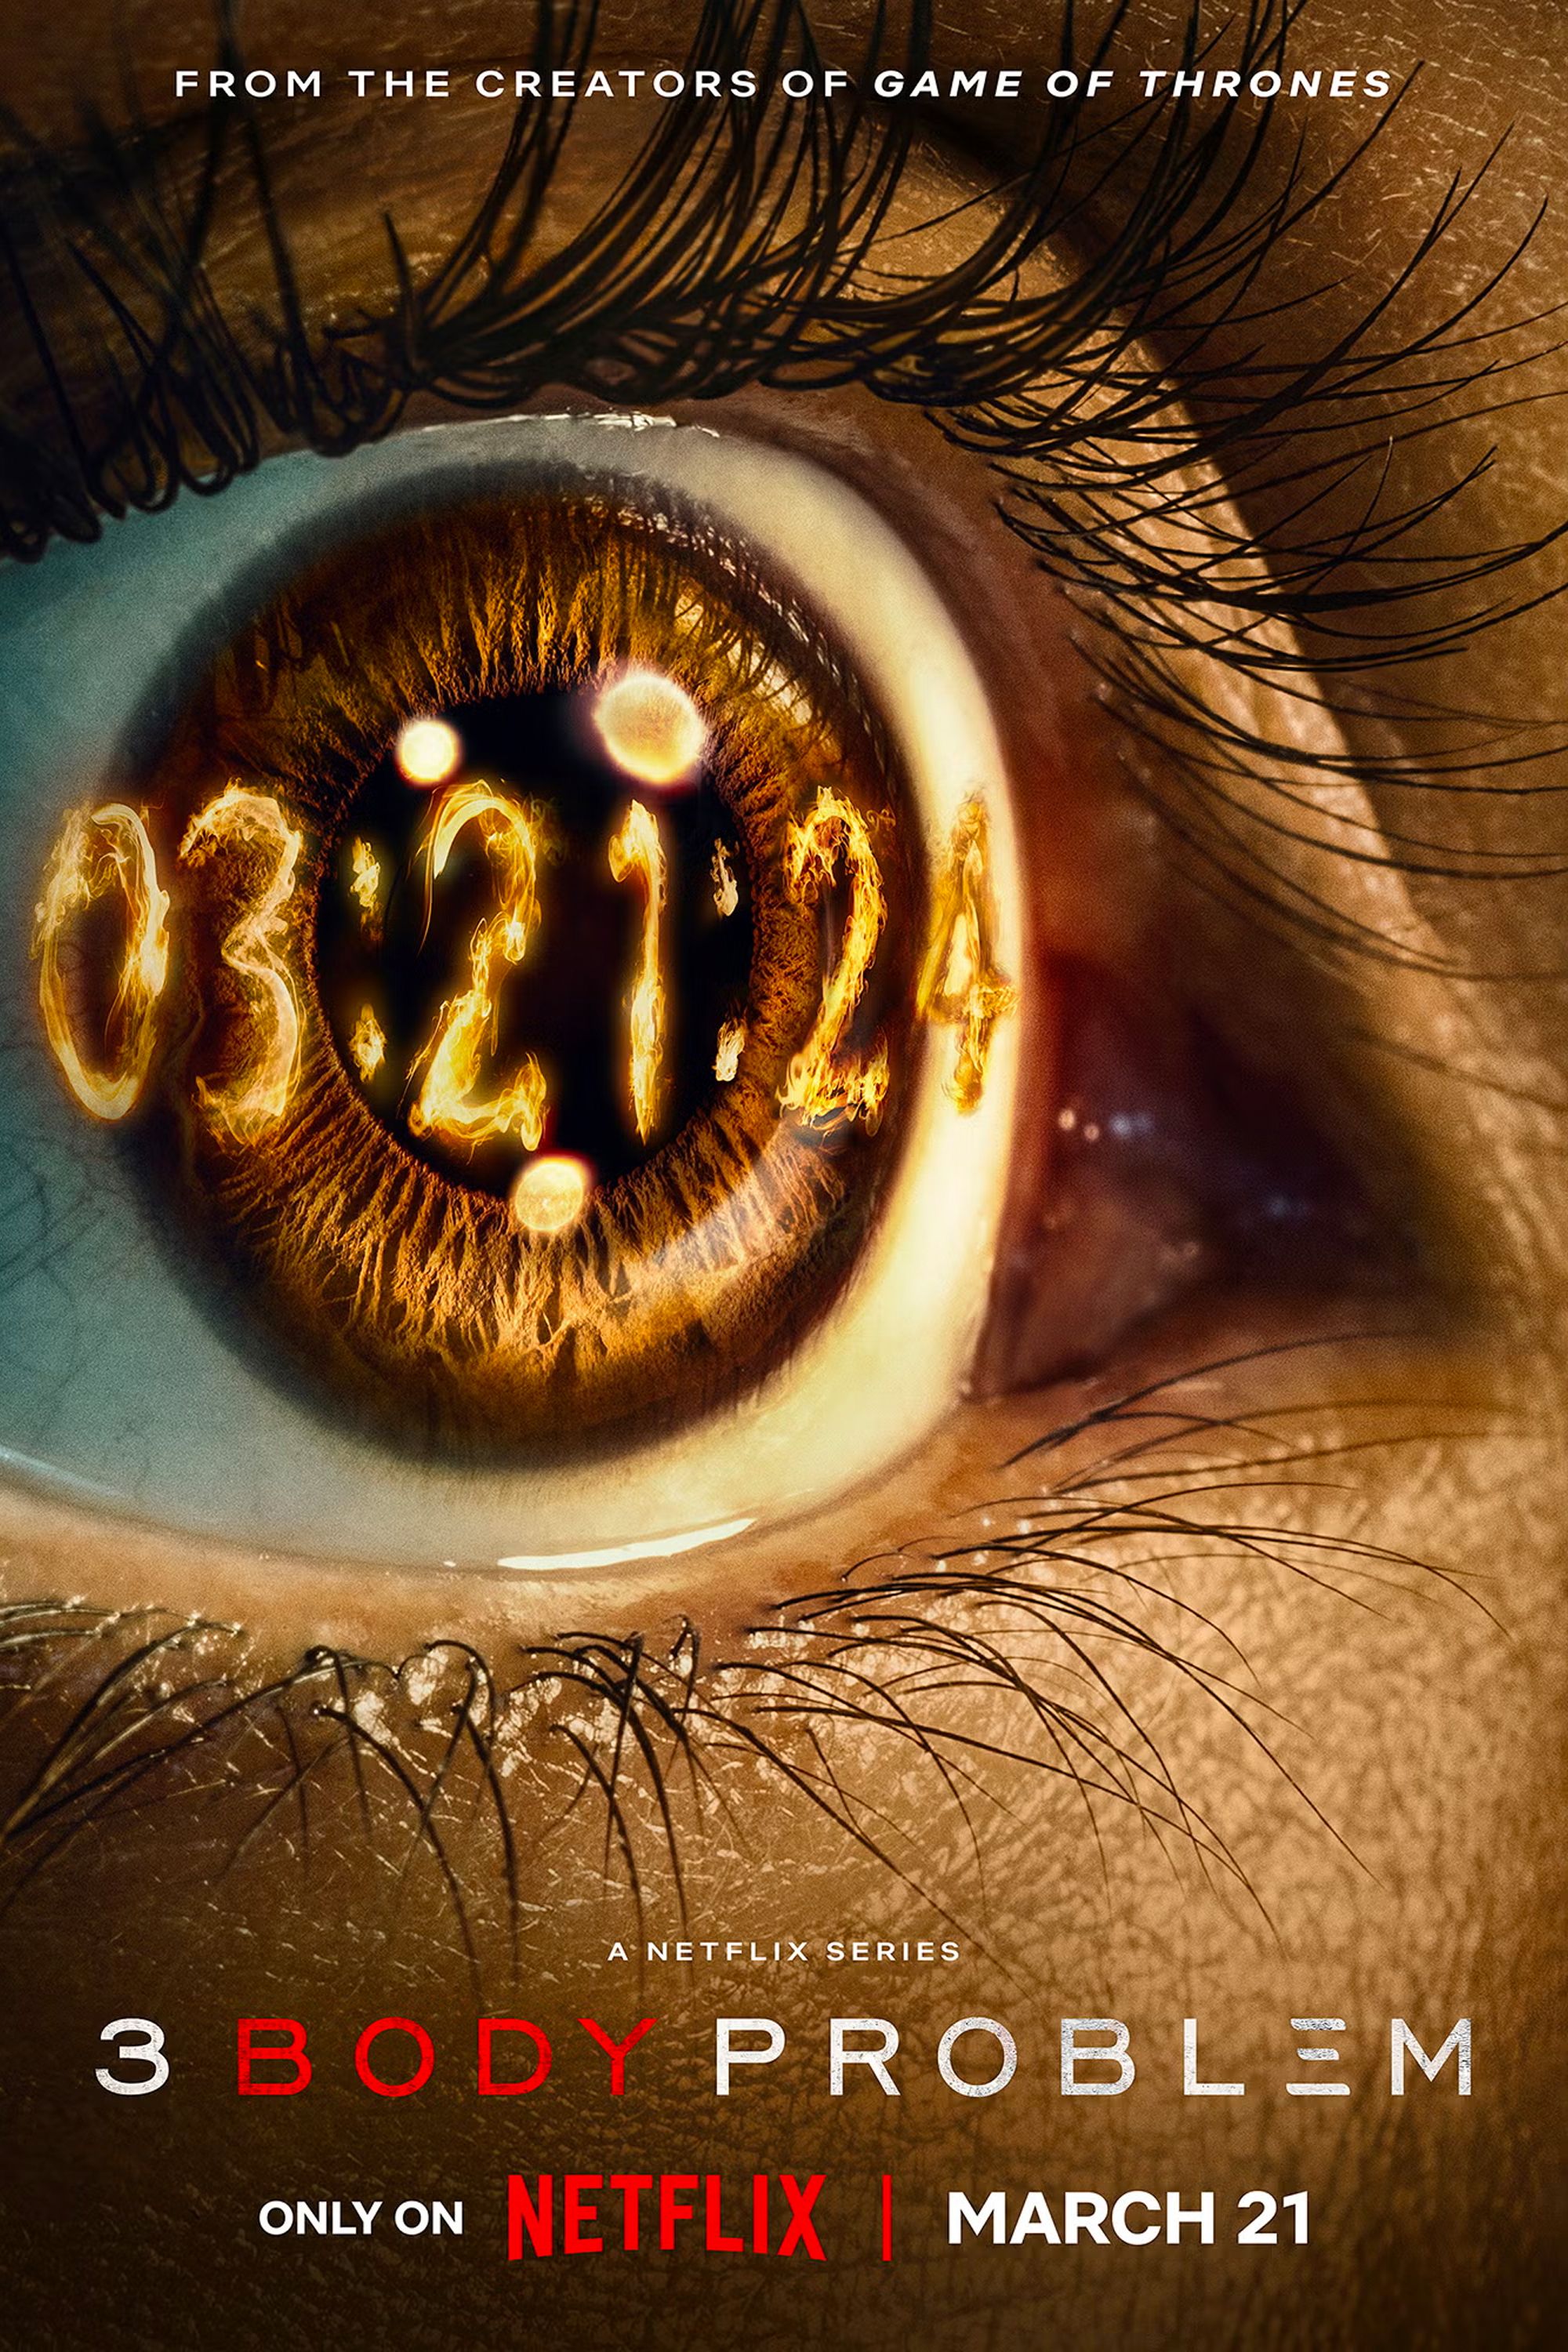 3 Body Matters The Netflix show poster has a close-up of an eyeball, with release dates listed on the pupil as March 21st and 24th